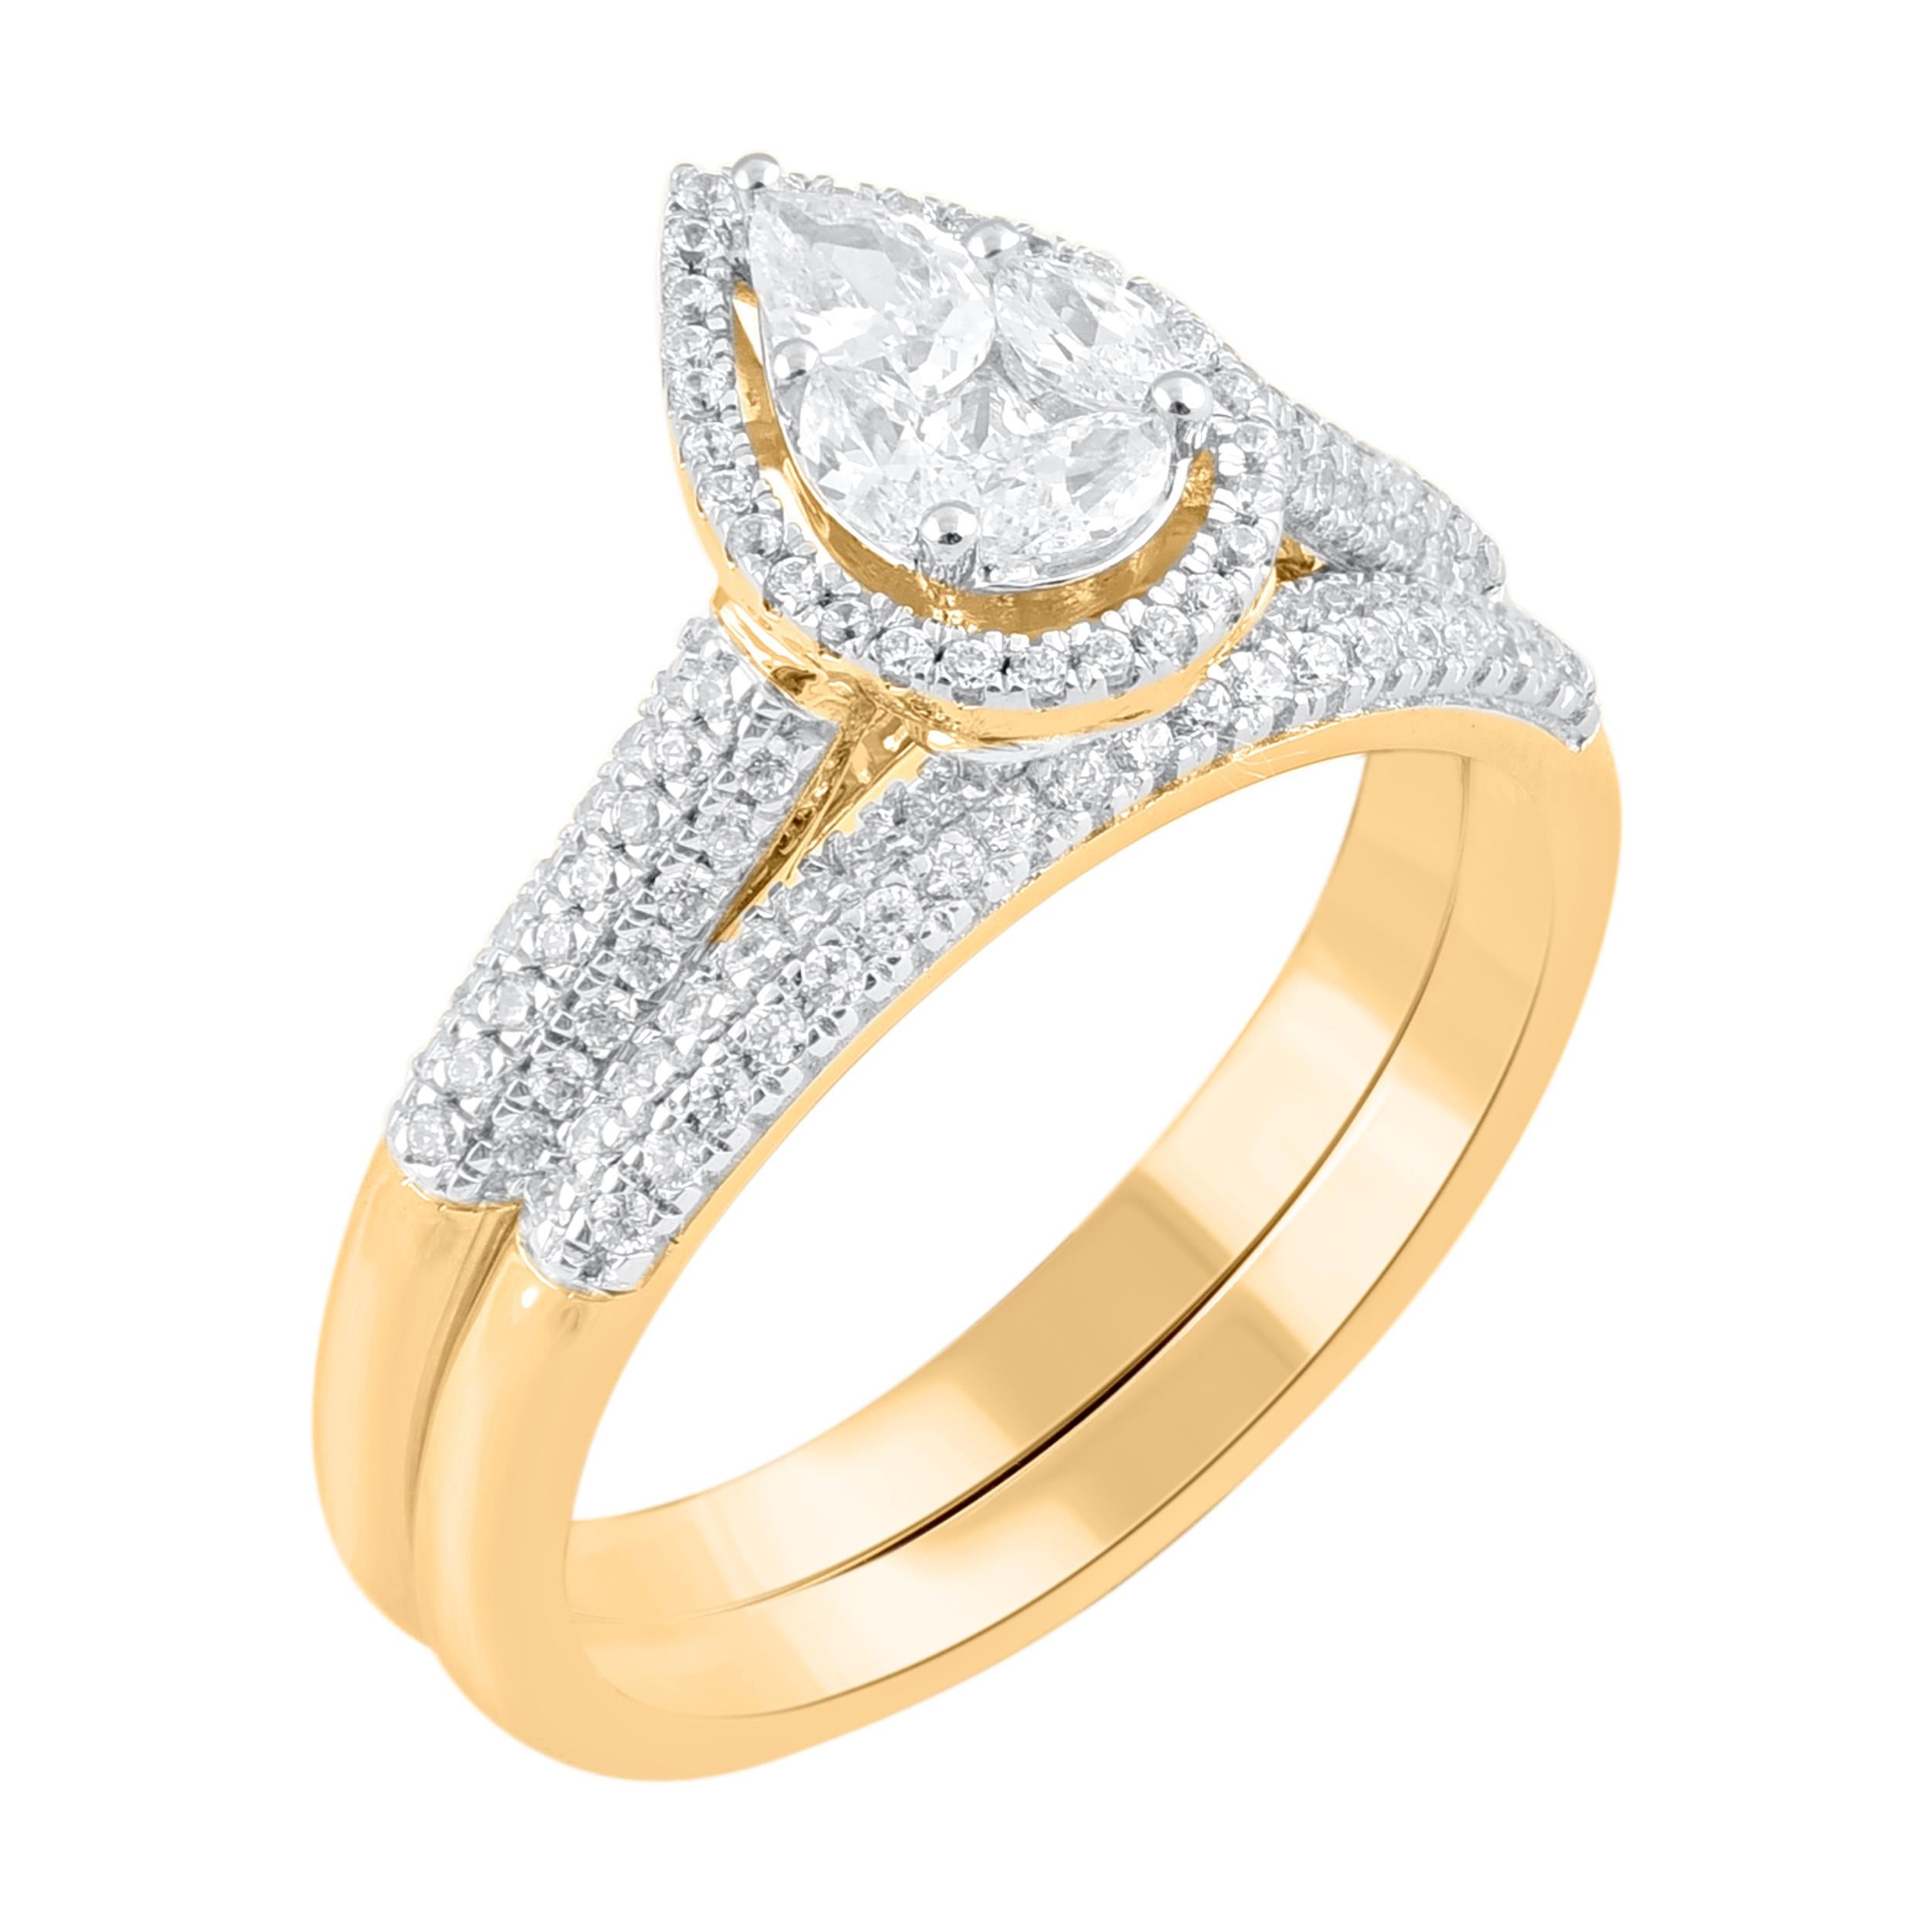 Make that special moment magical with the exquisite diamond bridal ring set. This classic bridal ring is studded with single cut, princess cut, pear & marquise cut 116 diamonds in pressure and prong setting. This ring is designed in 18-karat yellow